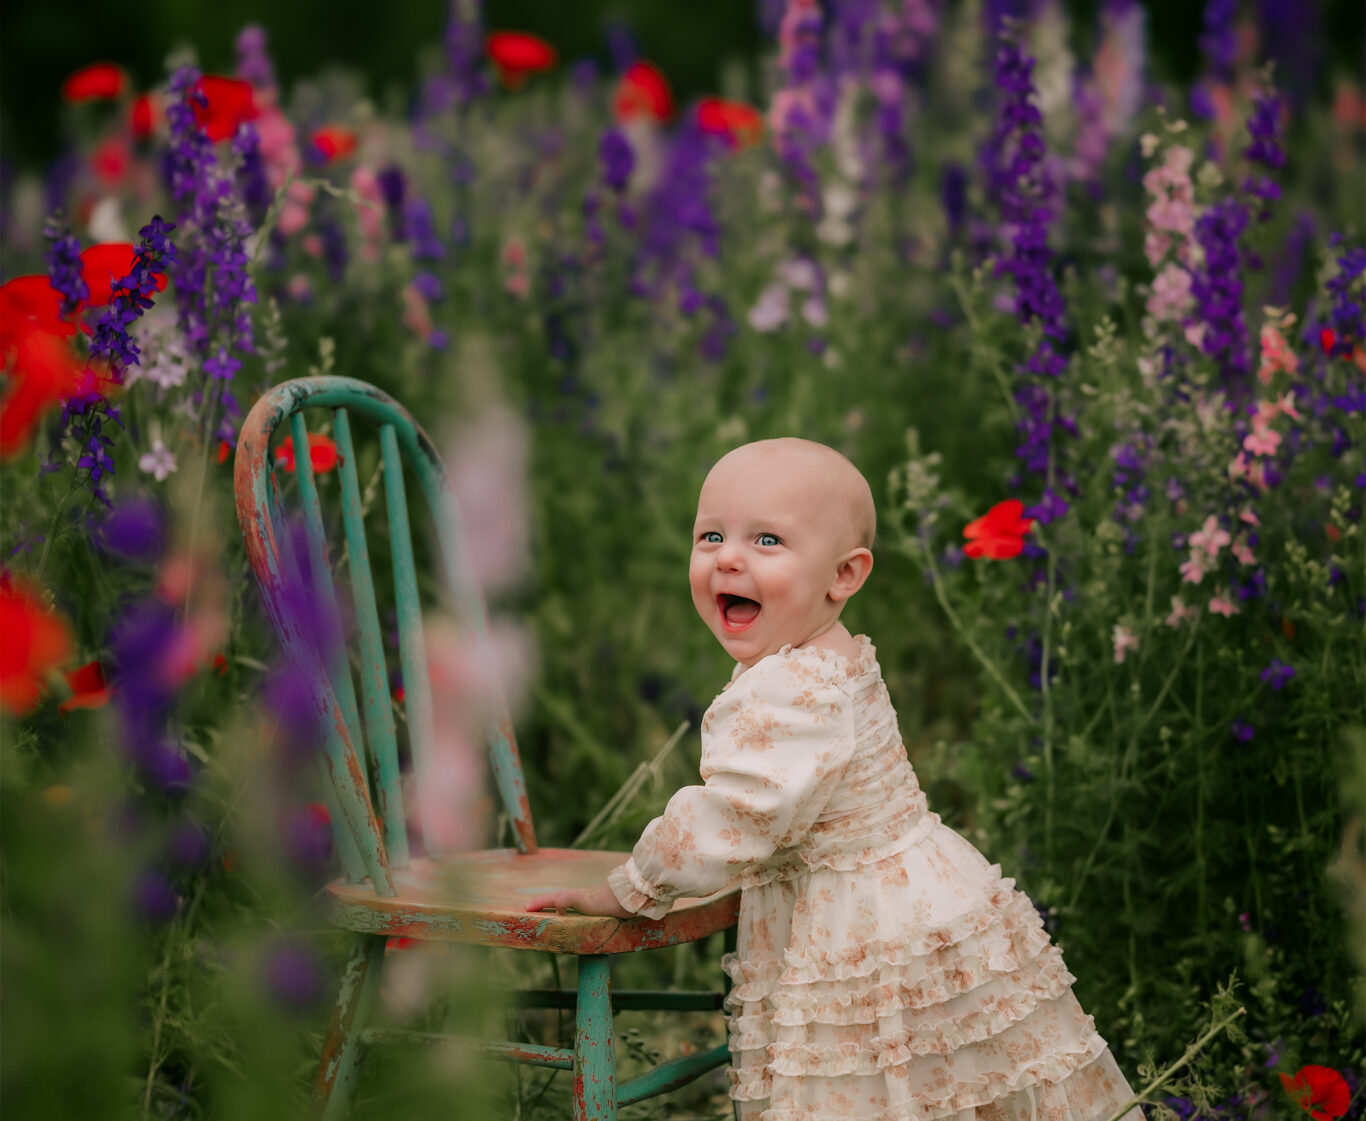 baby girl standing next to a small chair in the flowers